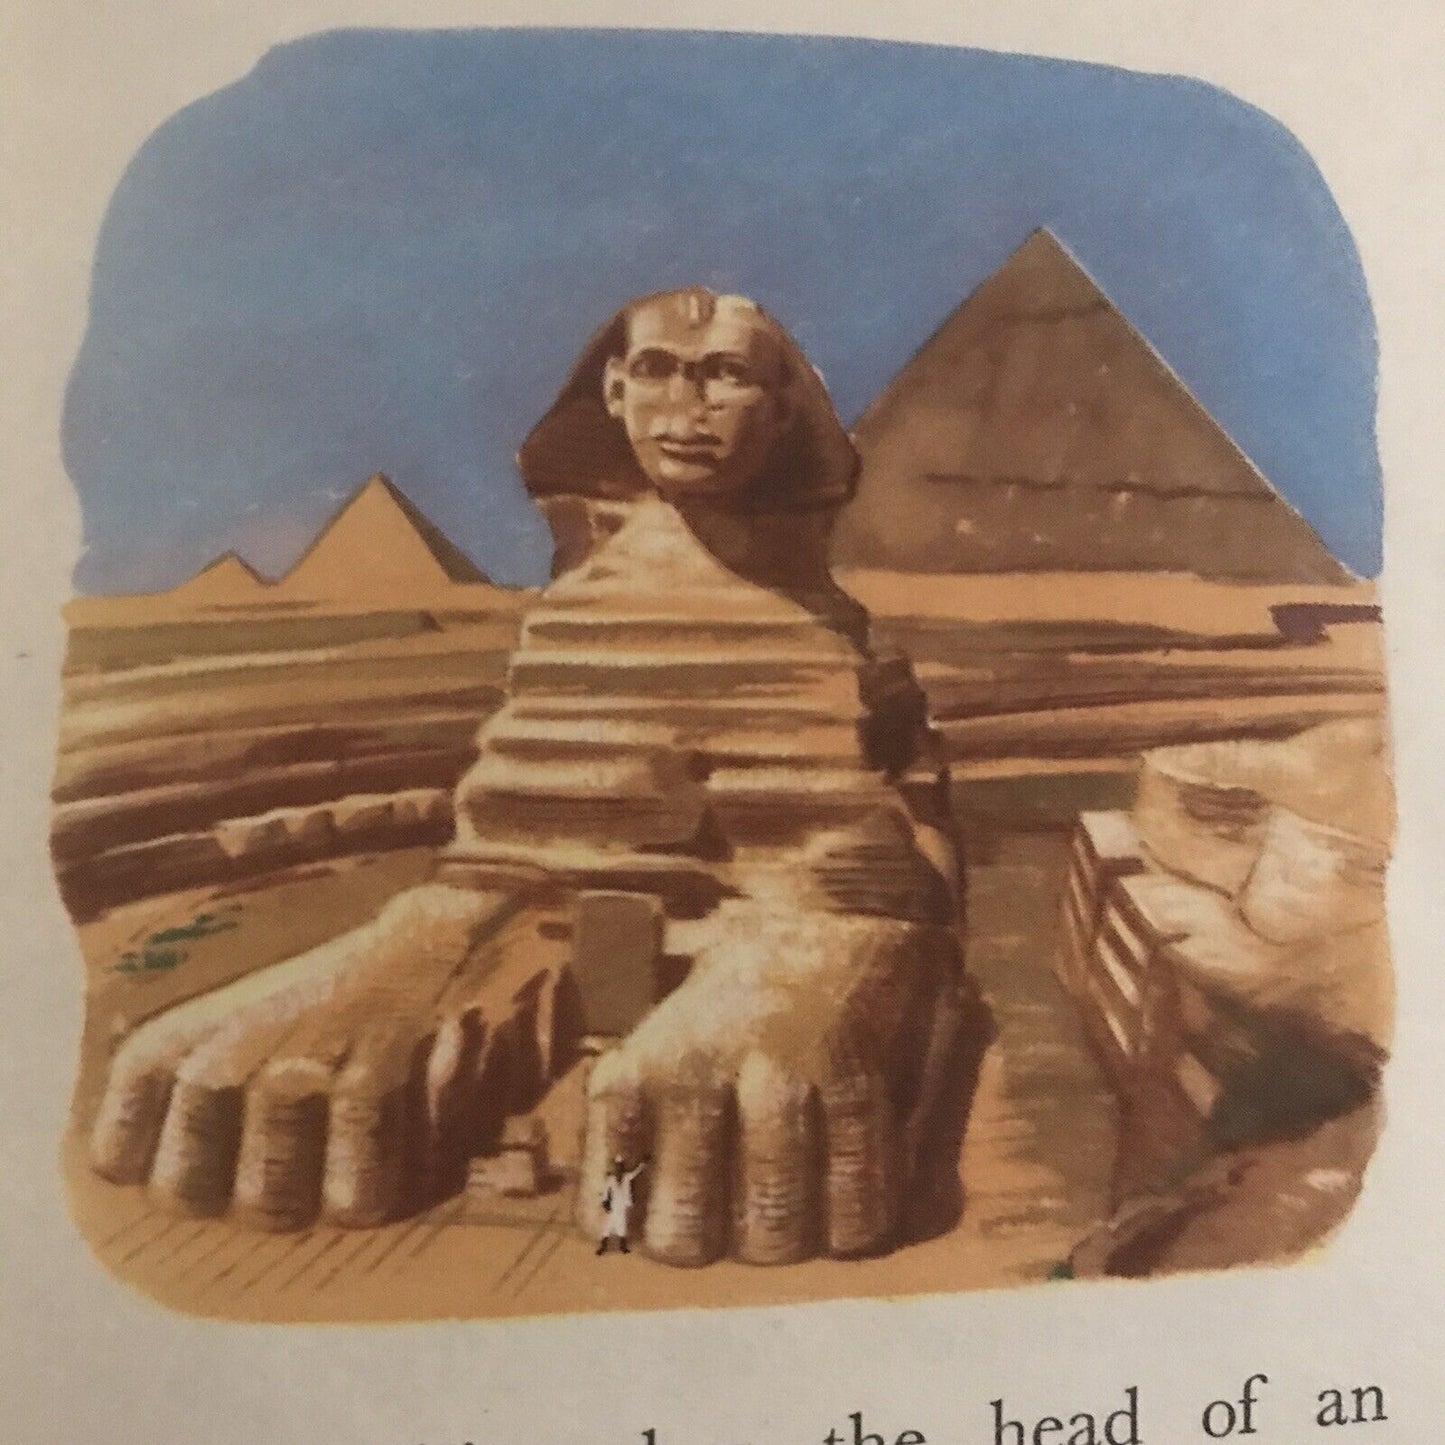 1959 My Home In Egypt (8) – Isabel Crombie (Longmans Green)